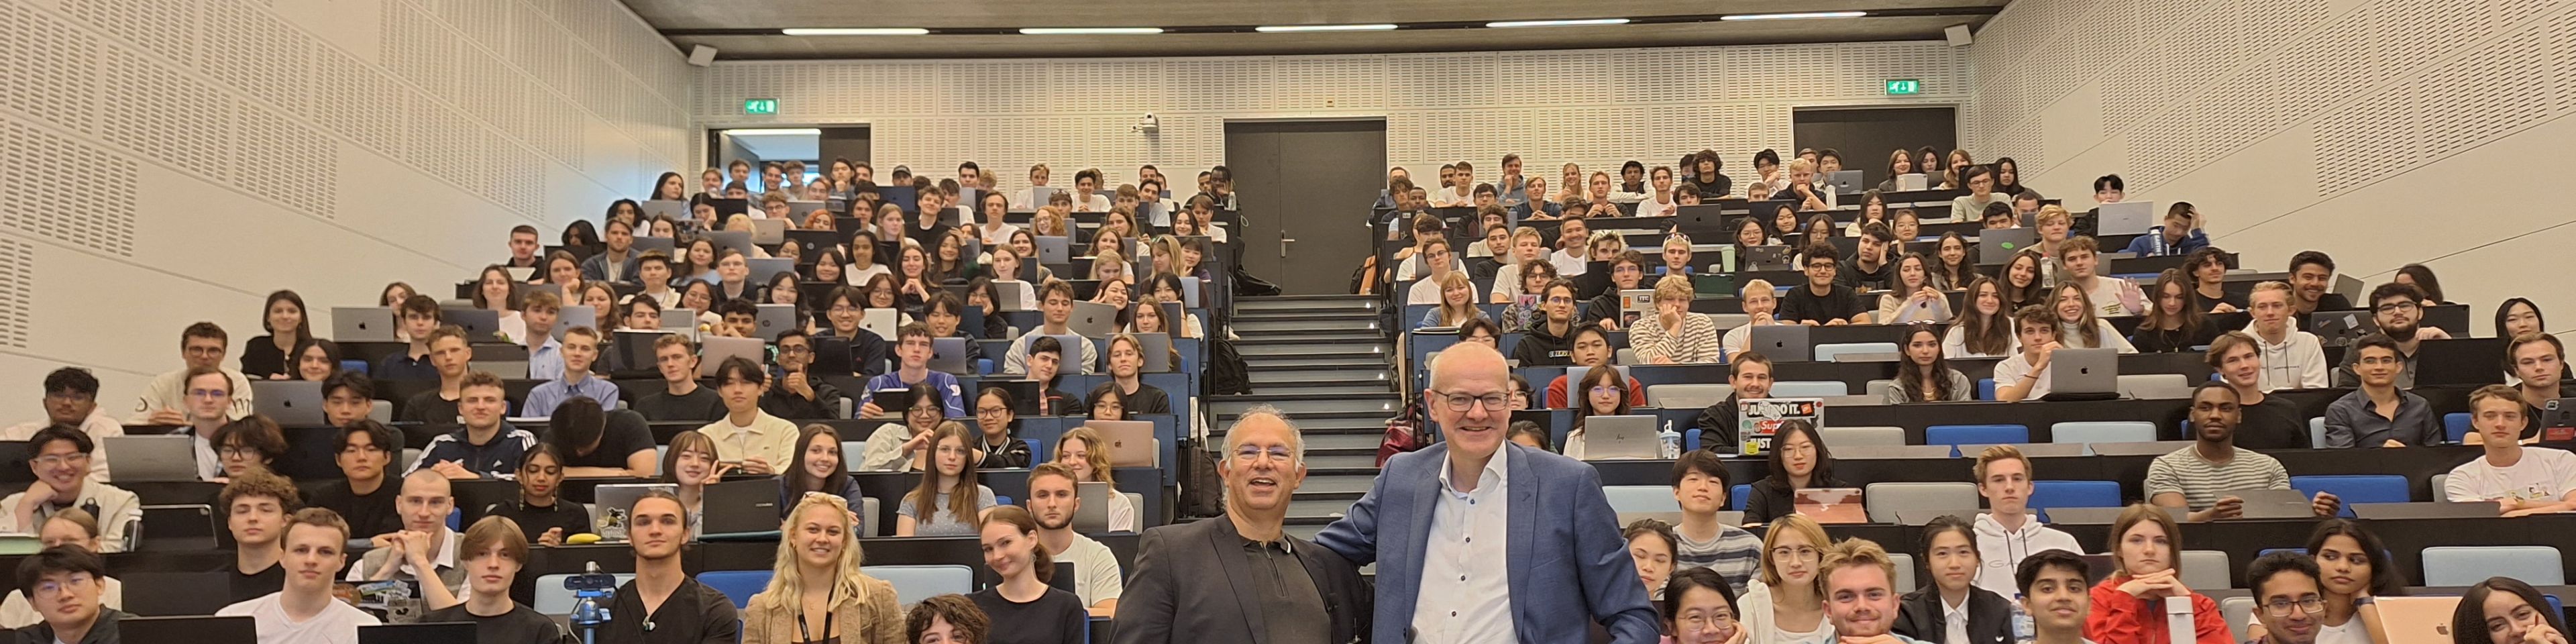 Analytics for a Better World Courses at the University of Amsterdam